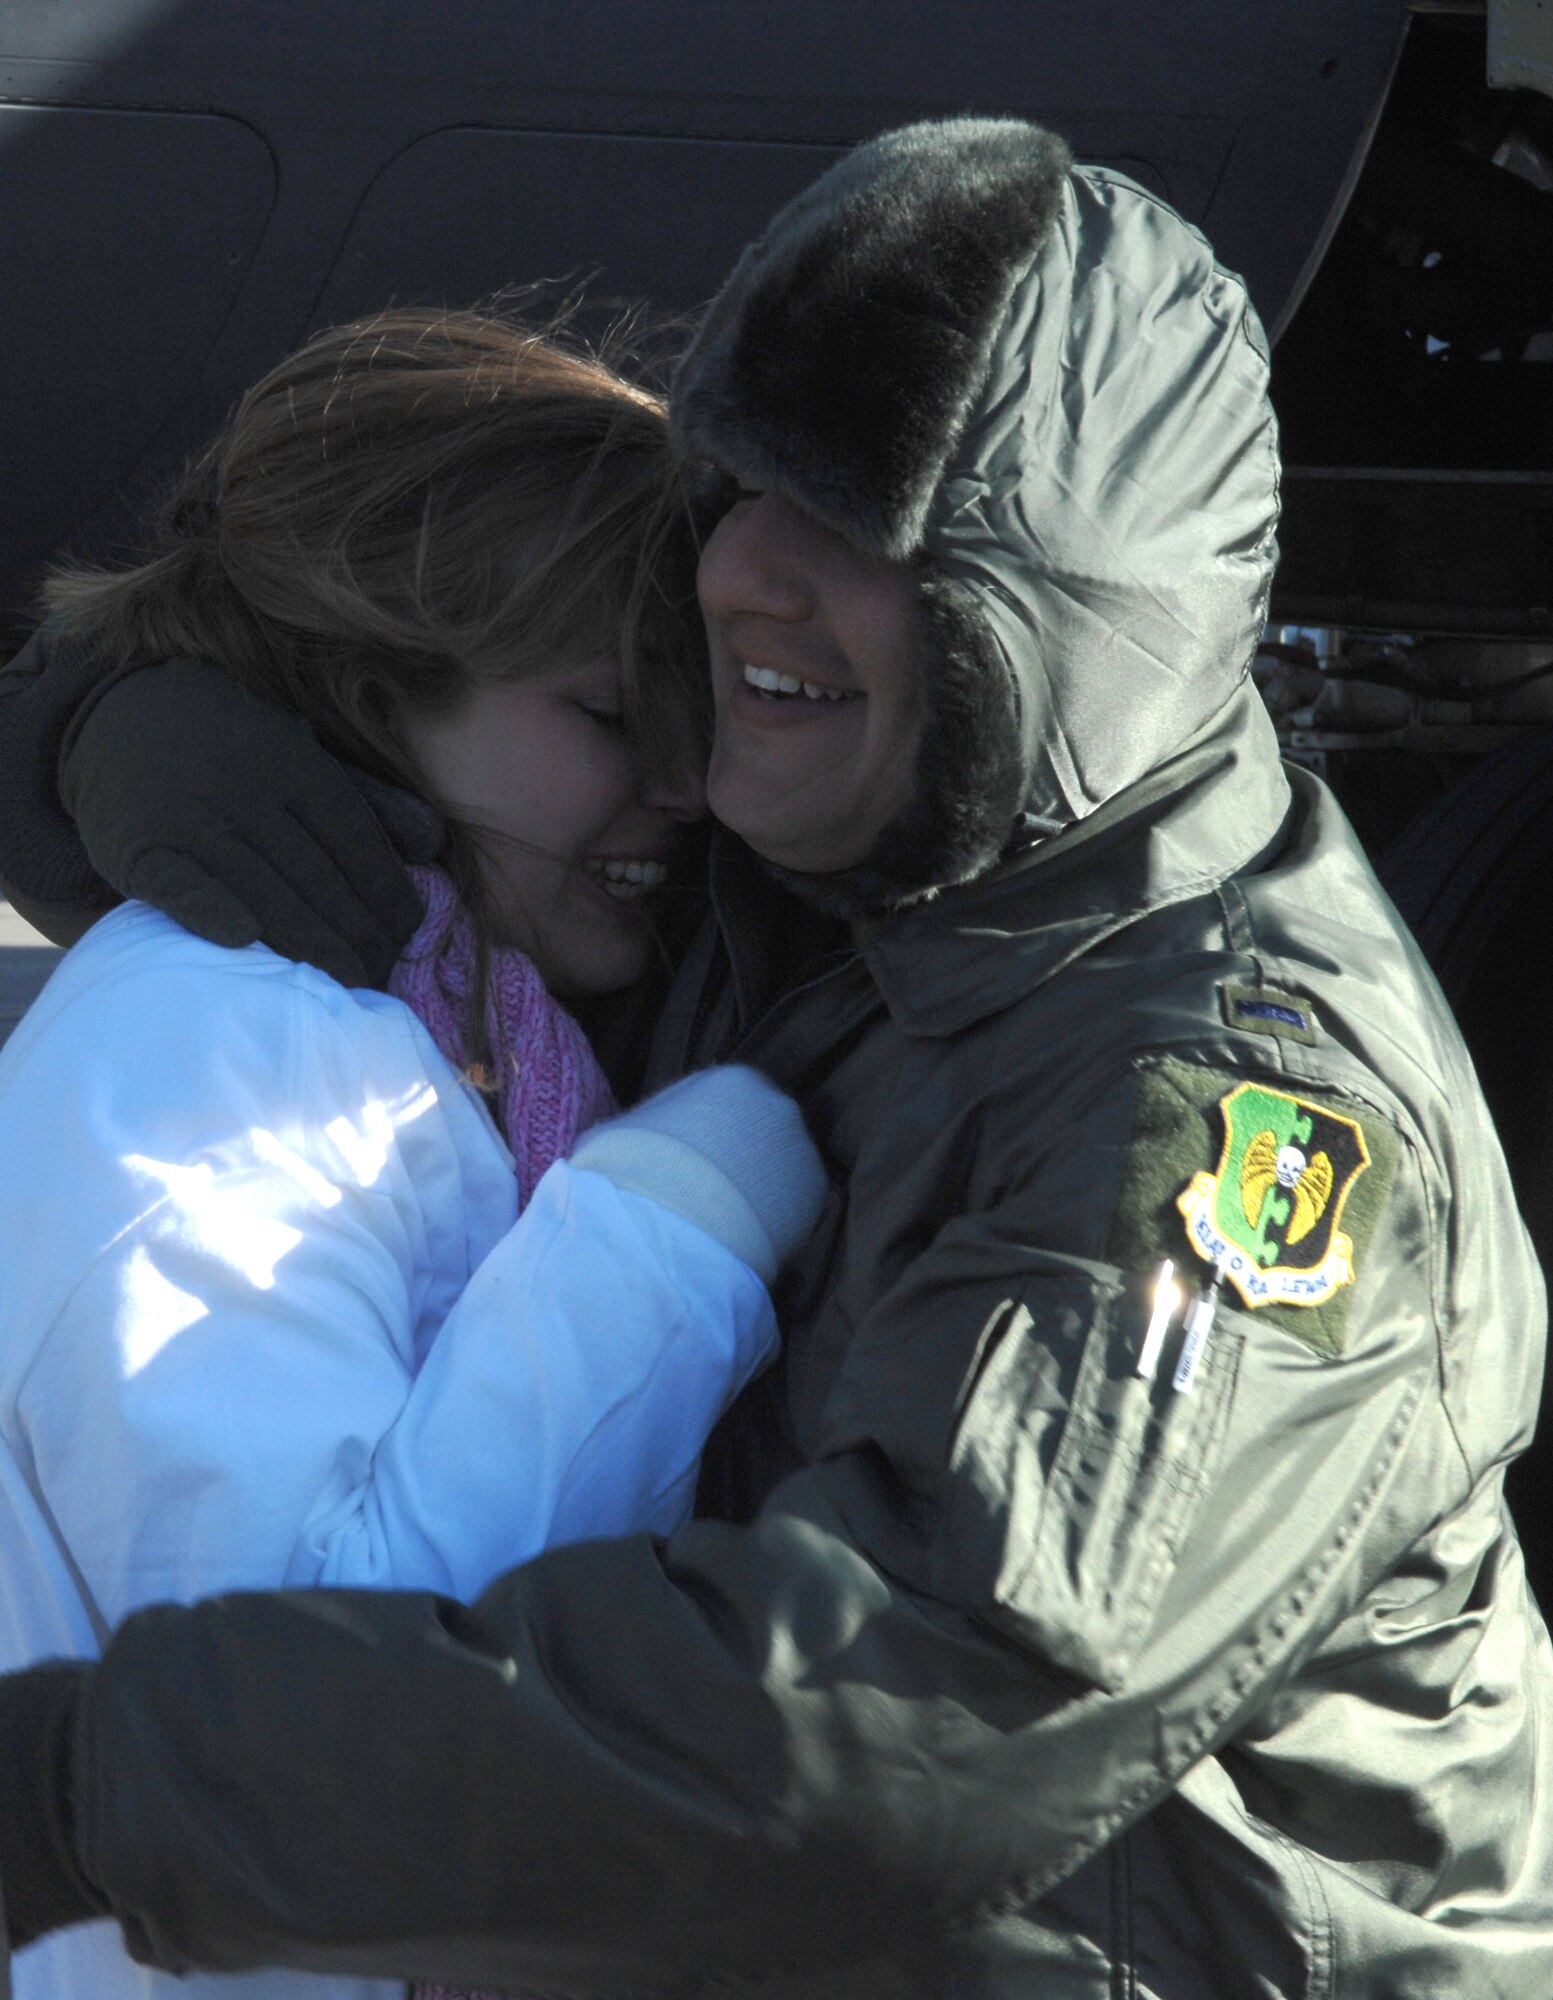 MINOT AIR FORCE BASE, N.D. -- First Lt. Patrick Godinez, 23rd Bomb Squadron, hugs his wife Melissa after returning from a deployment Jan. 29. Lieutenant Odom and other Minot Airmen were met by friends and family upon arriving home from a five-month deployment to Andersen Air Force Base, Guam. (U.S. Air Force photo by Airman 1st Class Christopher Boitz)